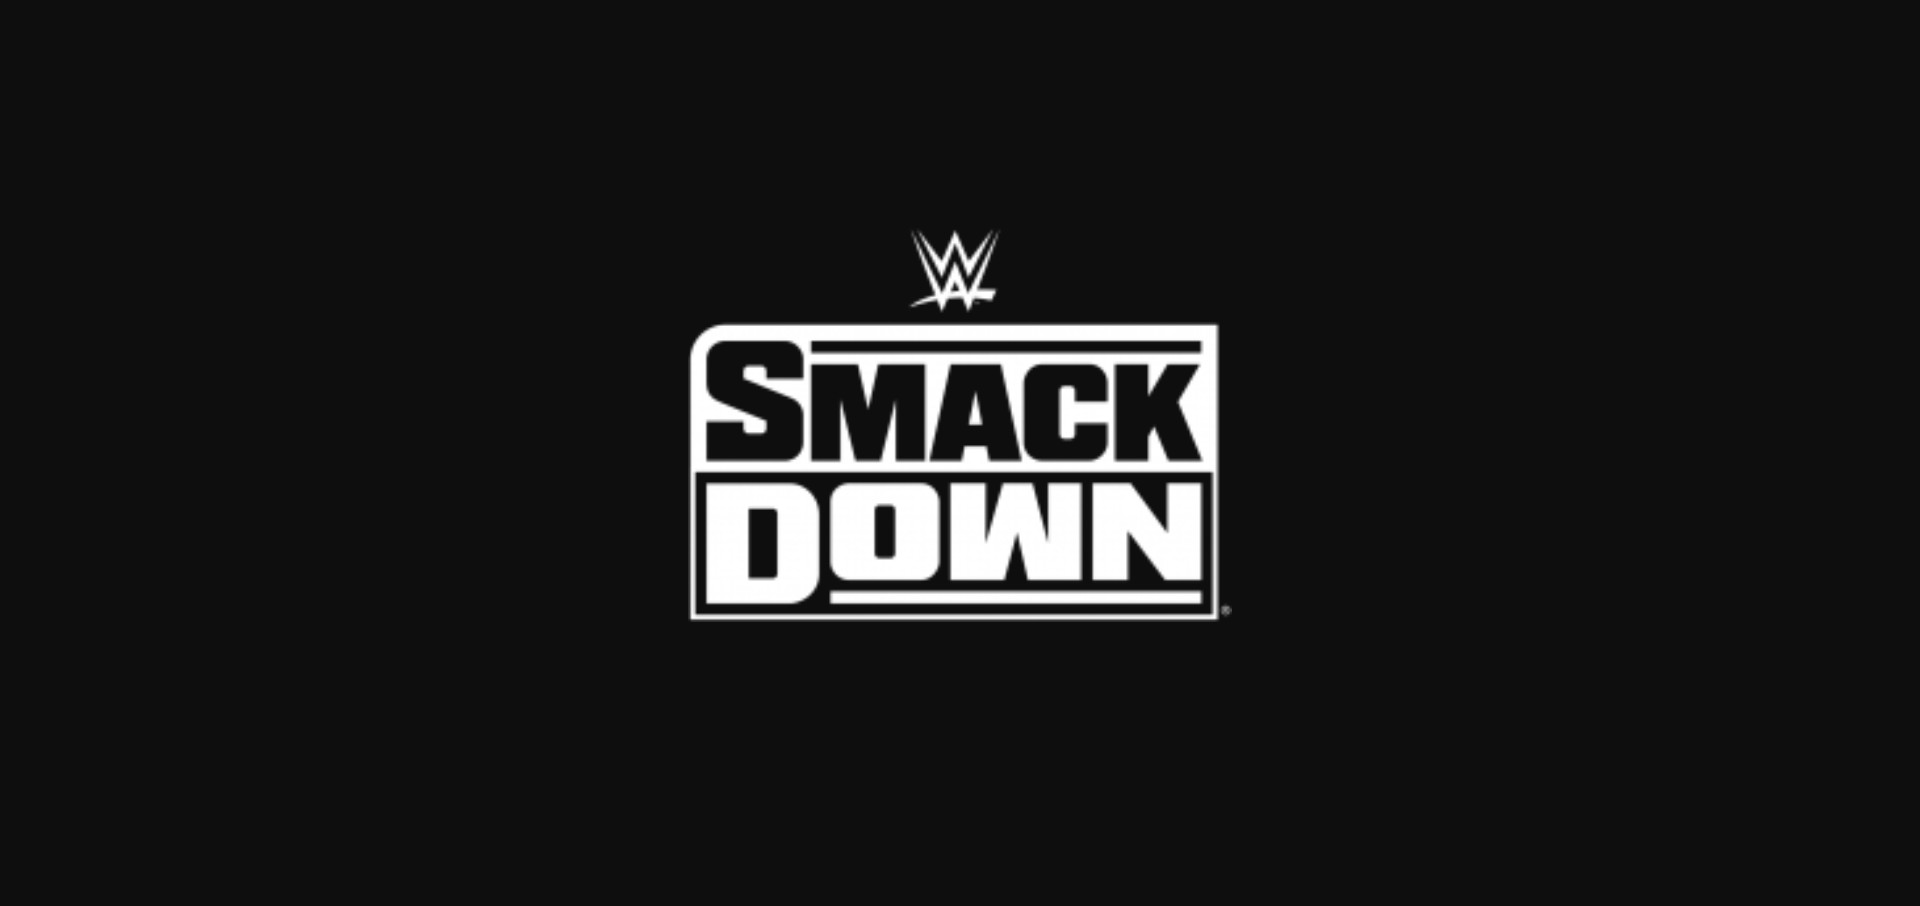 WWE SmackDown latest episode delayed on Hulu, support says they're working on it